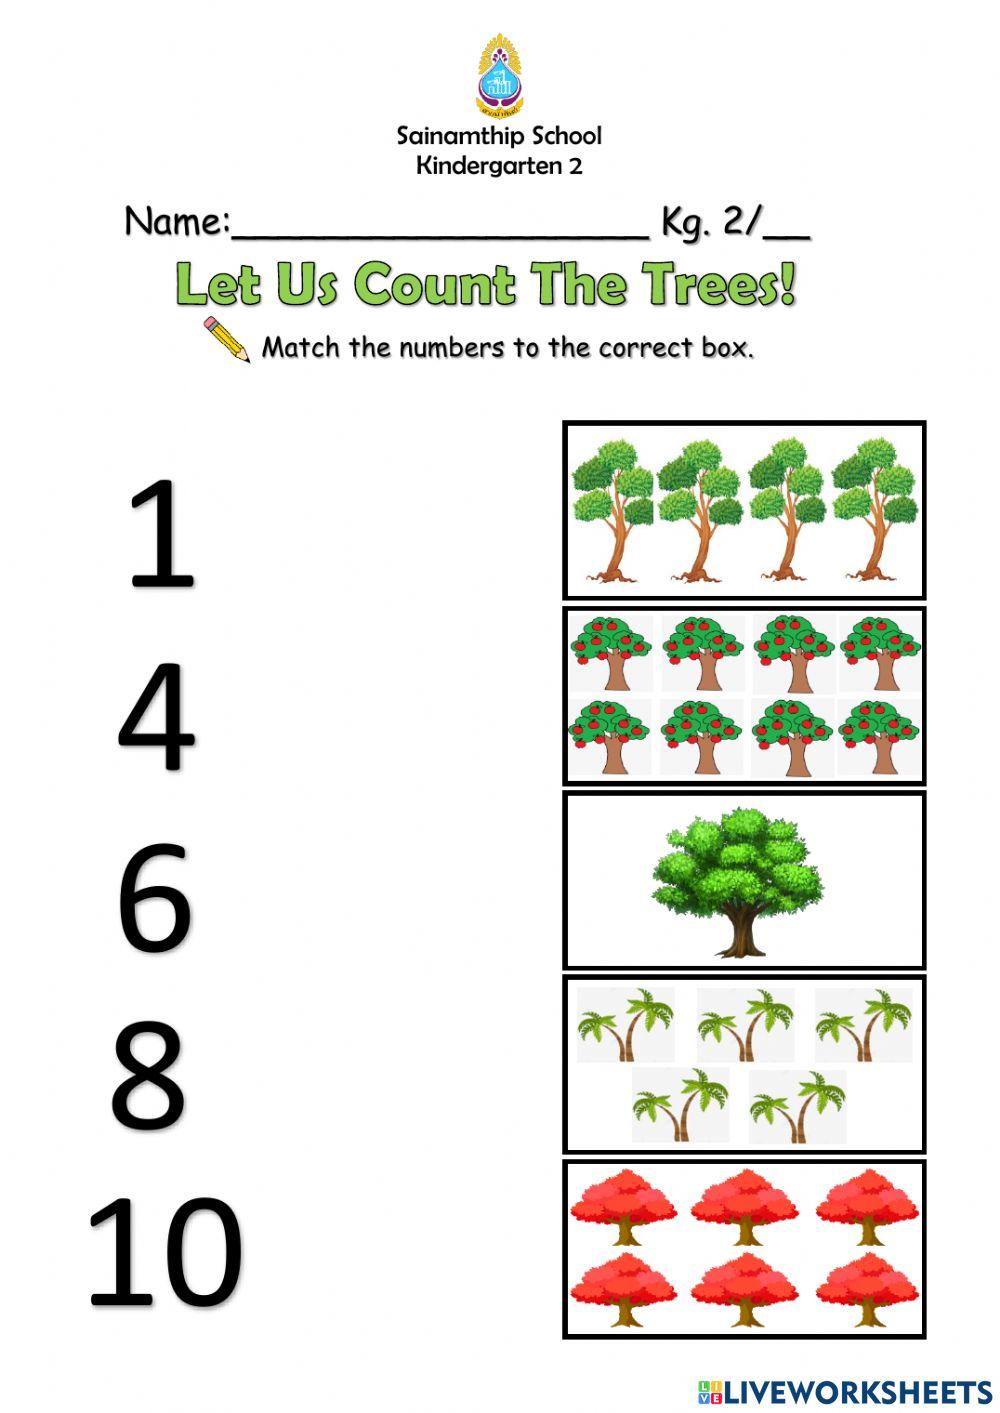 Counting trees